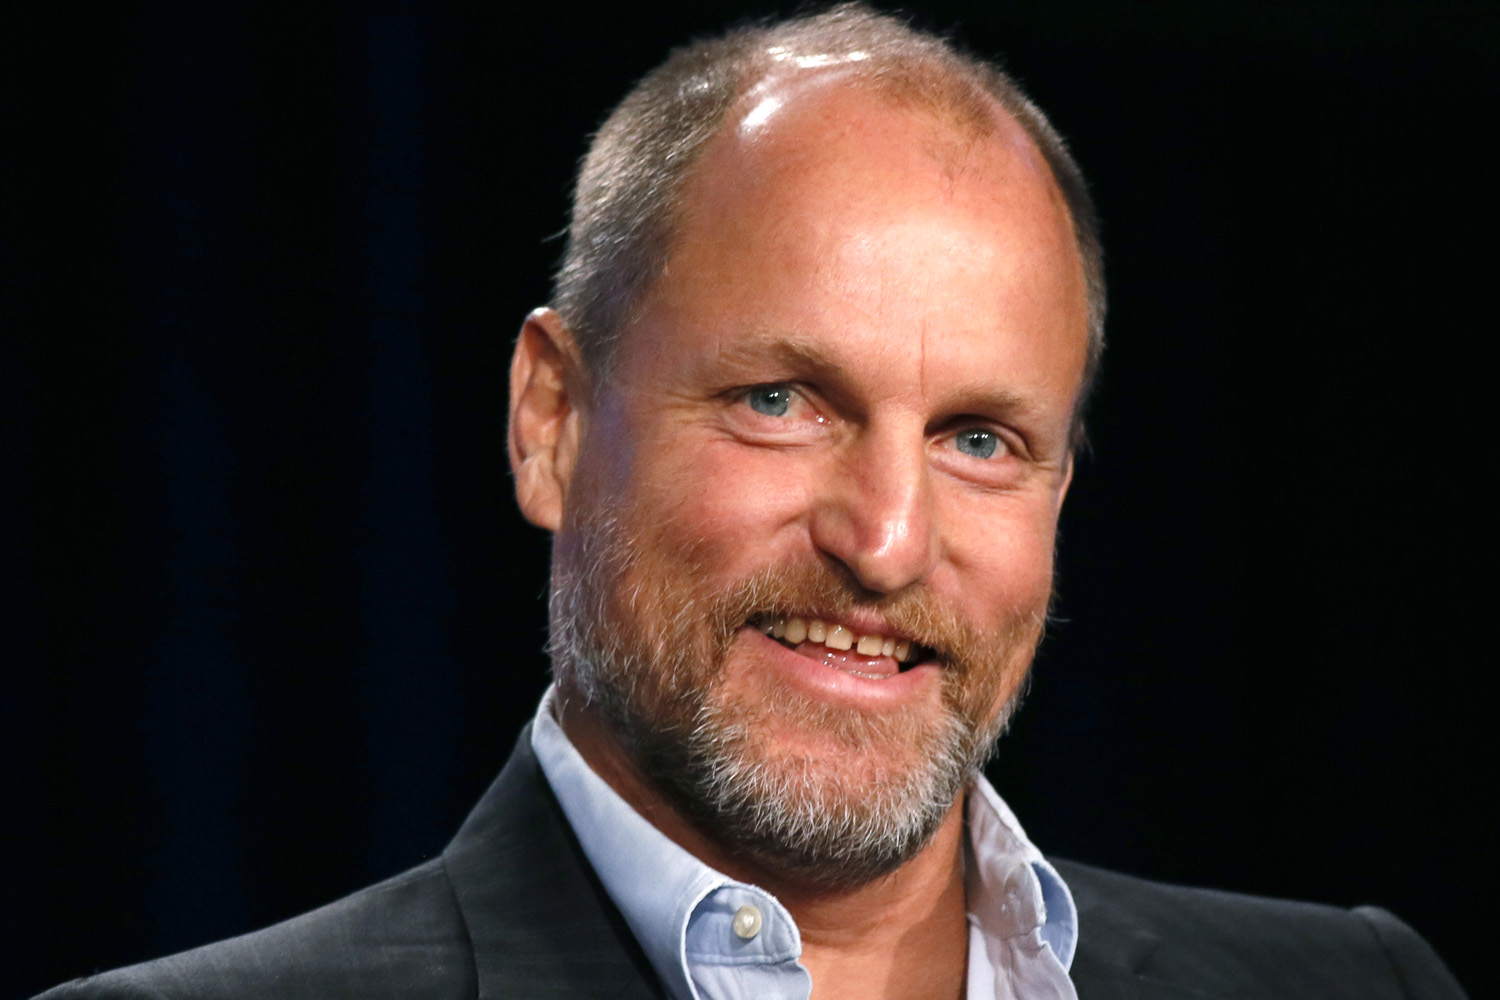 Actor Woody Harrelson talks about HBO's "True Detective" during the Winter 2014 TCA presentations in Pasadena, California, January 9, 2014. REUTERS/Lucy Nicholson (UNITED STATES - Tags: ENTERTAINMENT)